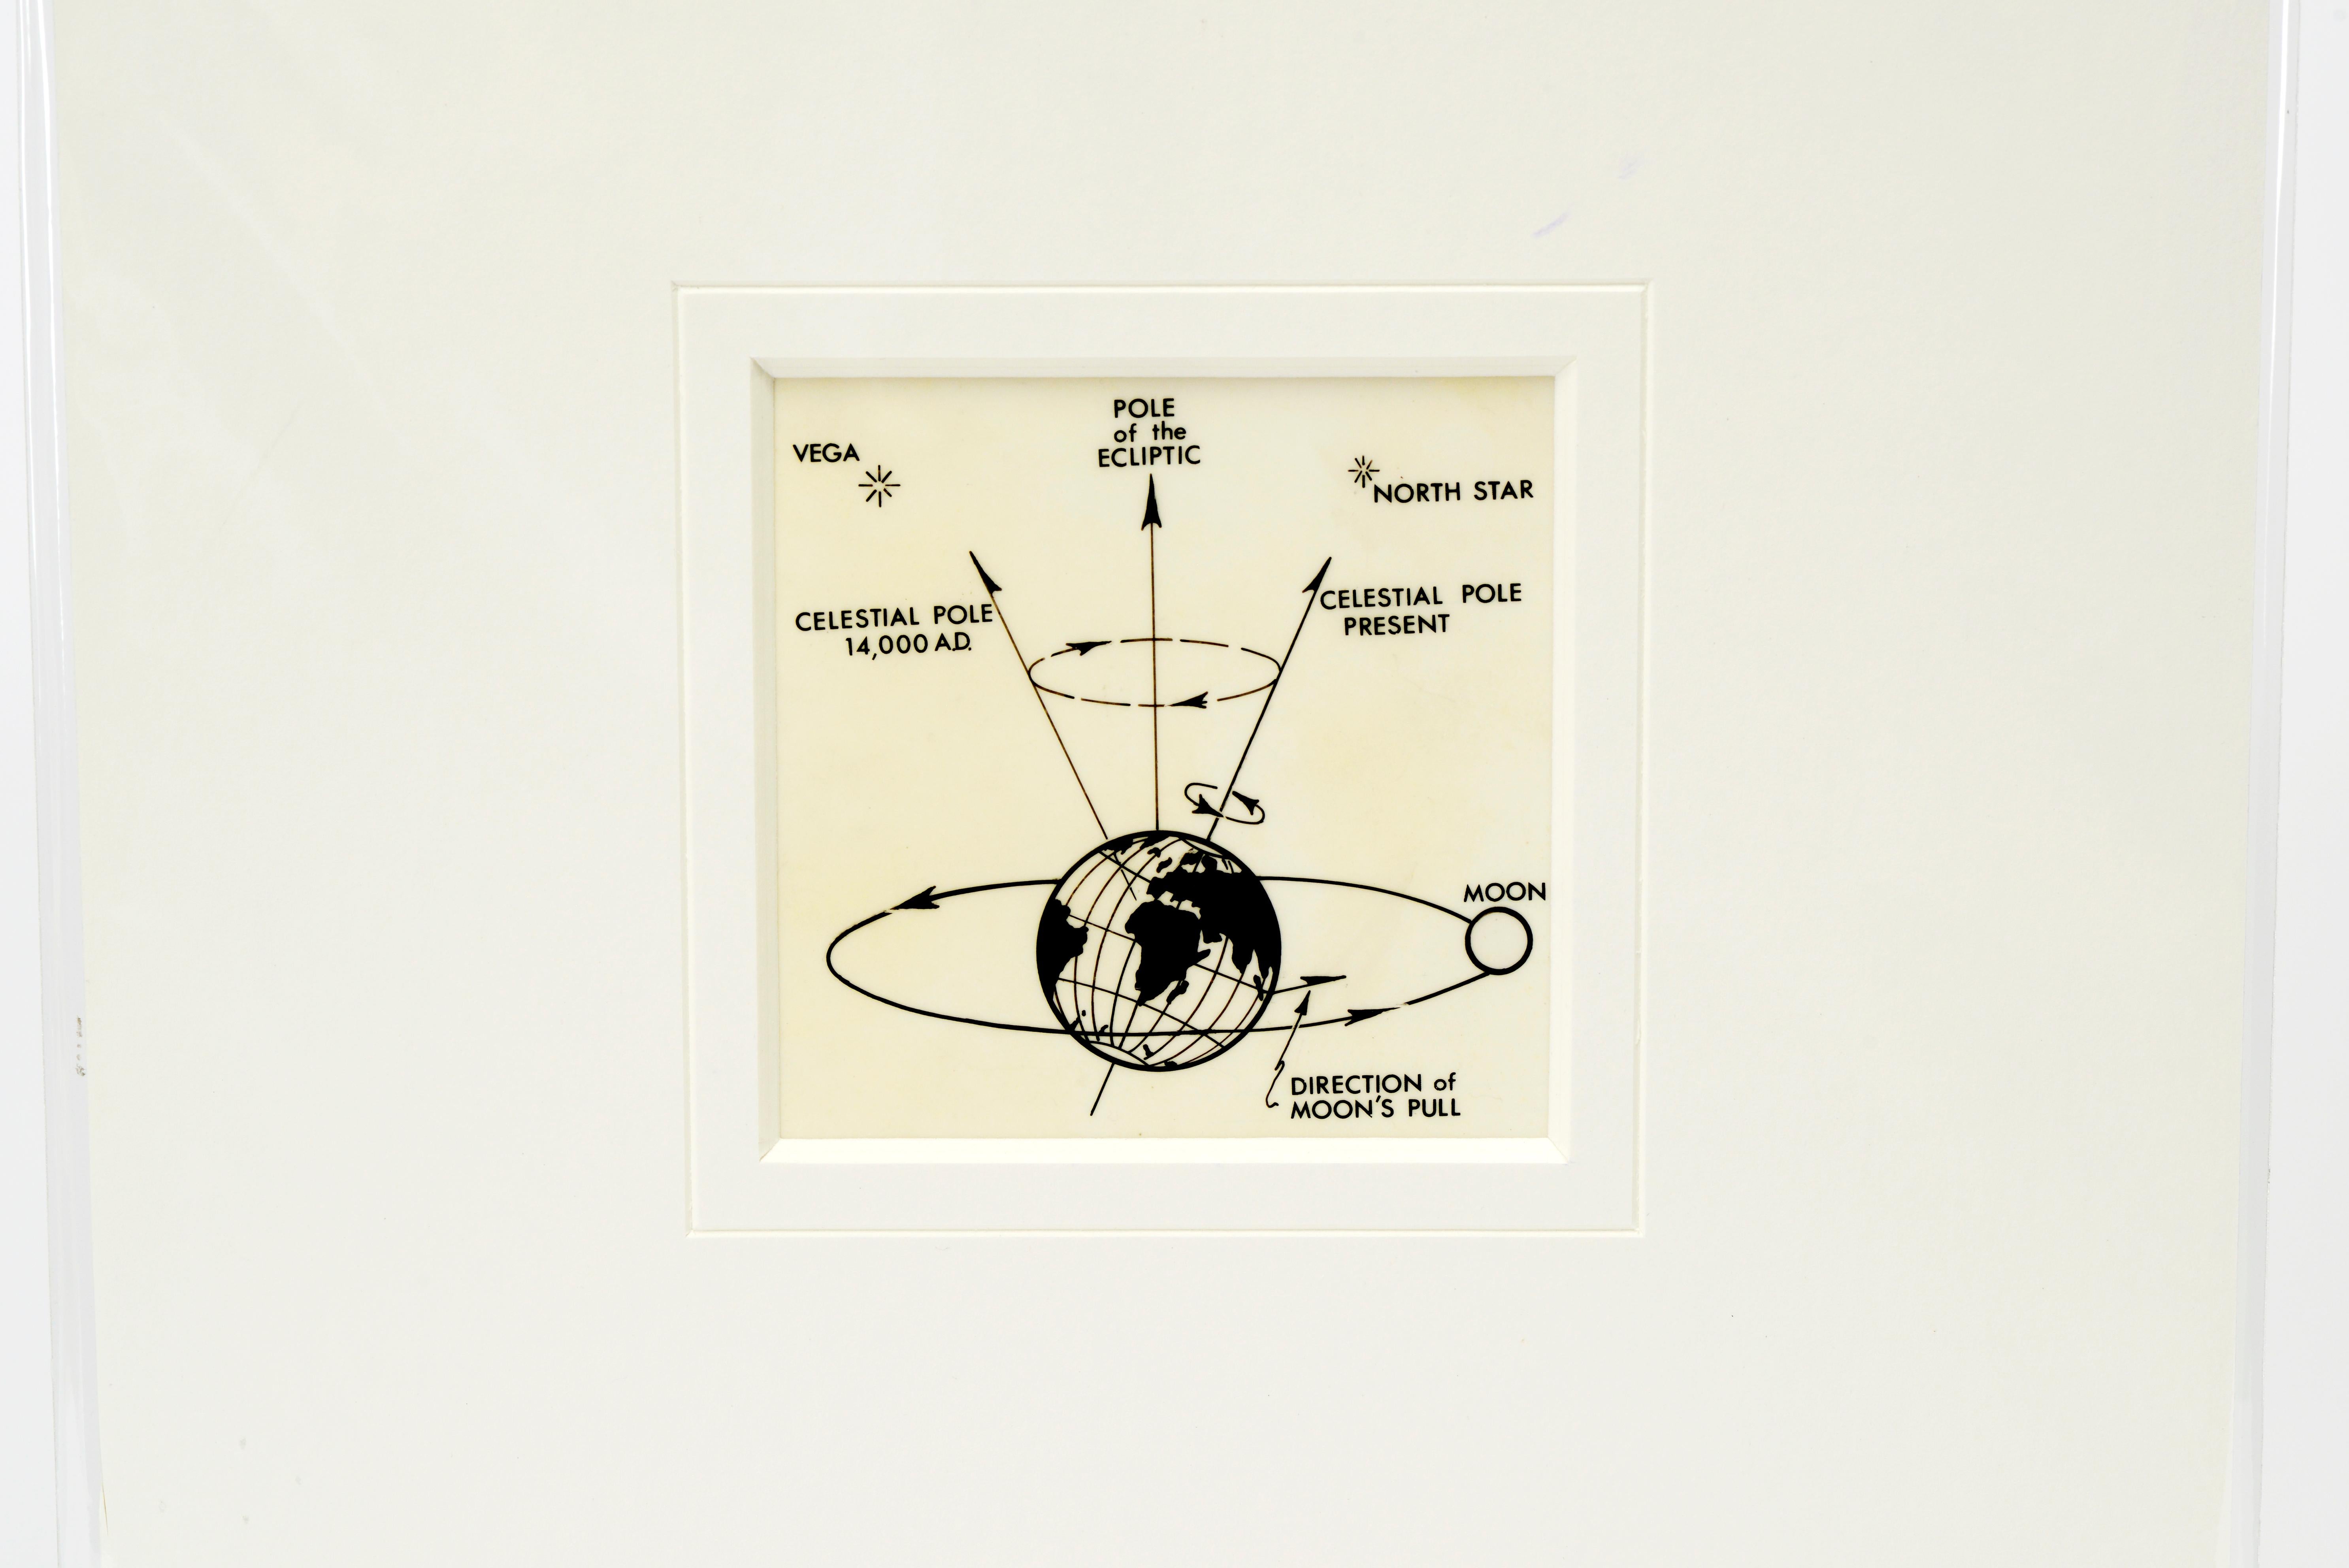 We got our hands on a stash of midcentury scientific diagrams from the archives of the Griffith Observatory, Los Angeles. This info graphic print depicts the axis of the Earth with text referring to the Poles, the direction of the Moon's pull and